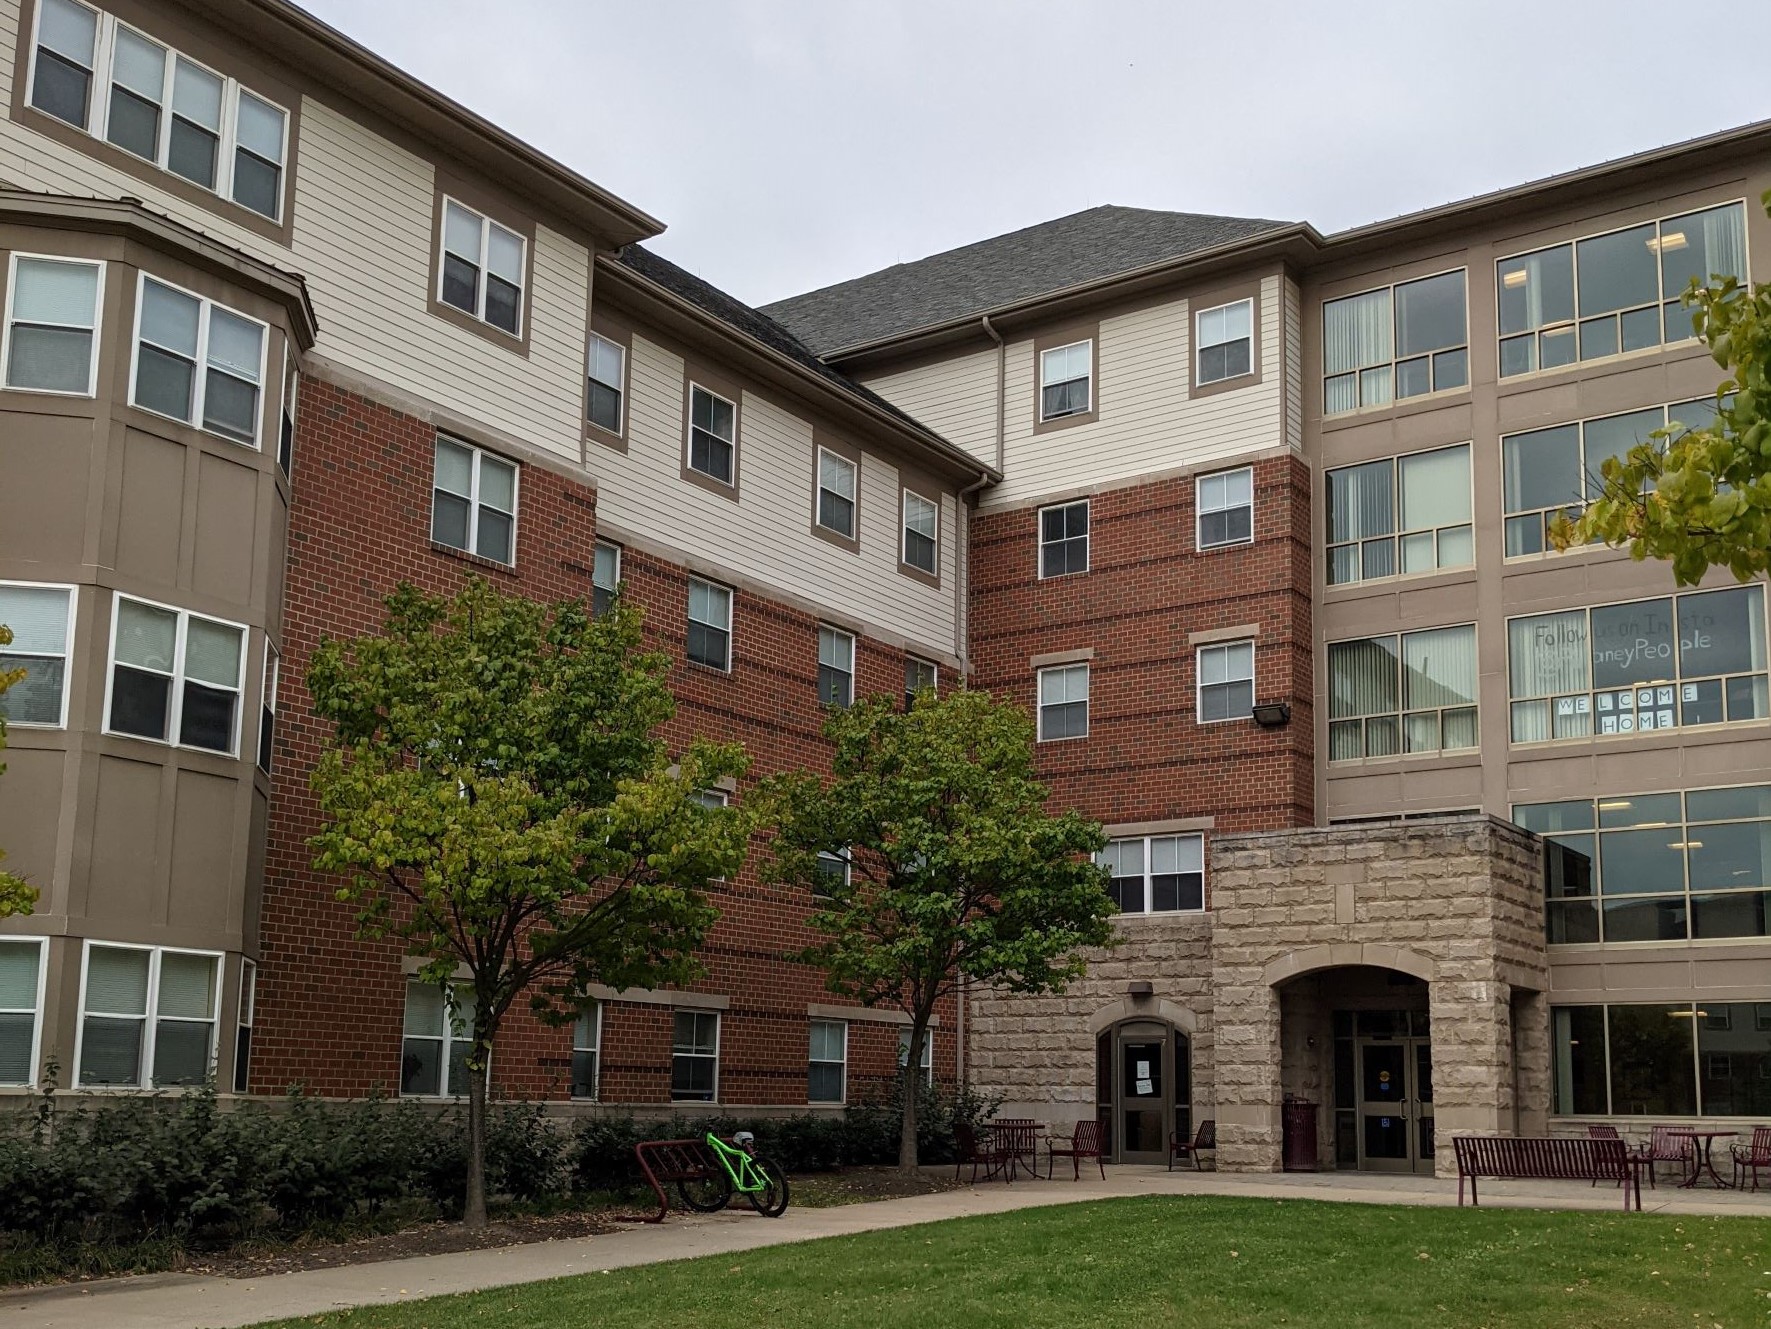 Traditional looking red brick contemporary living learning student housing community dormitory building with tan clerestory , courtyard in foreground, stone brick portico at building entry